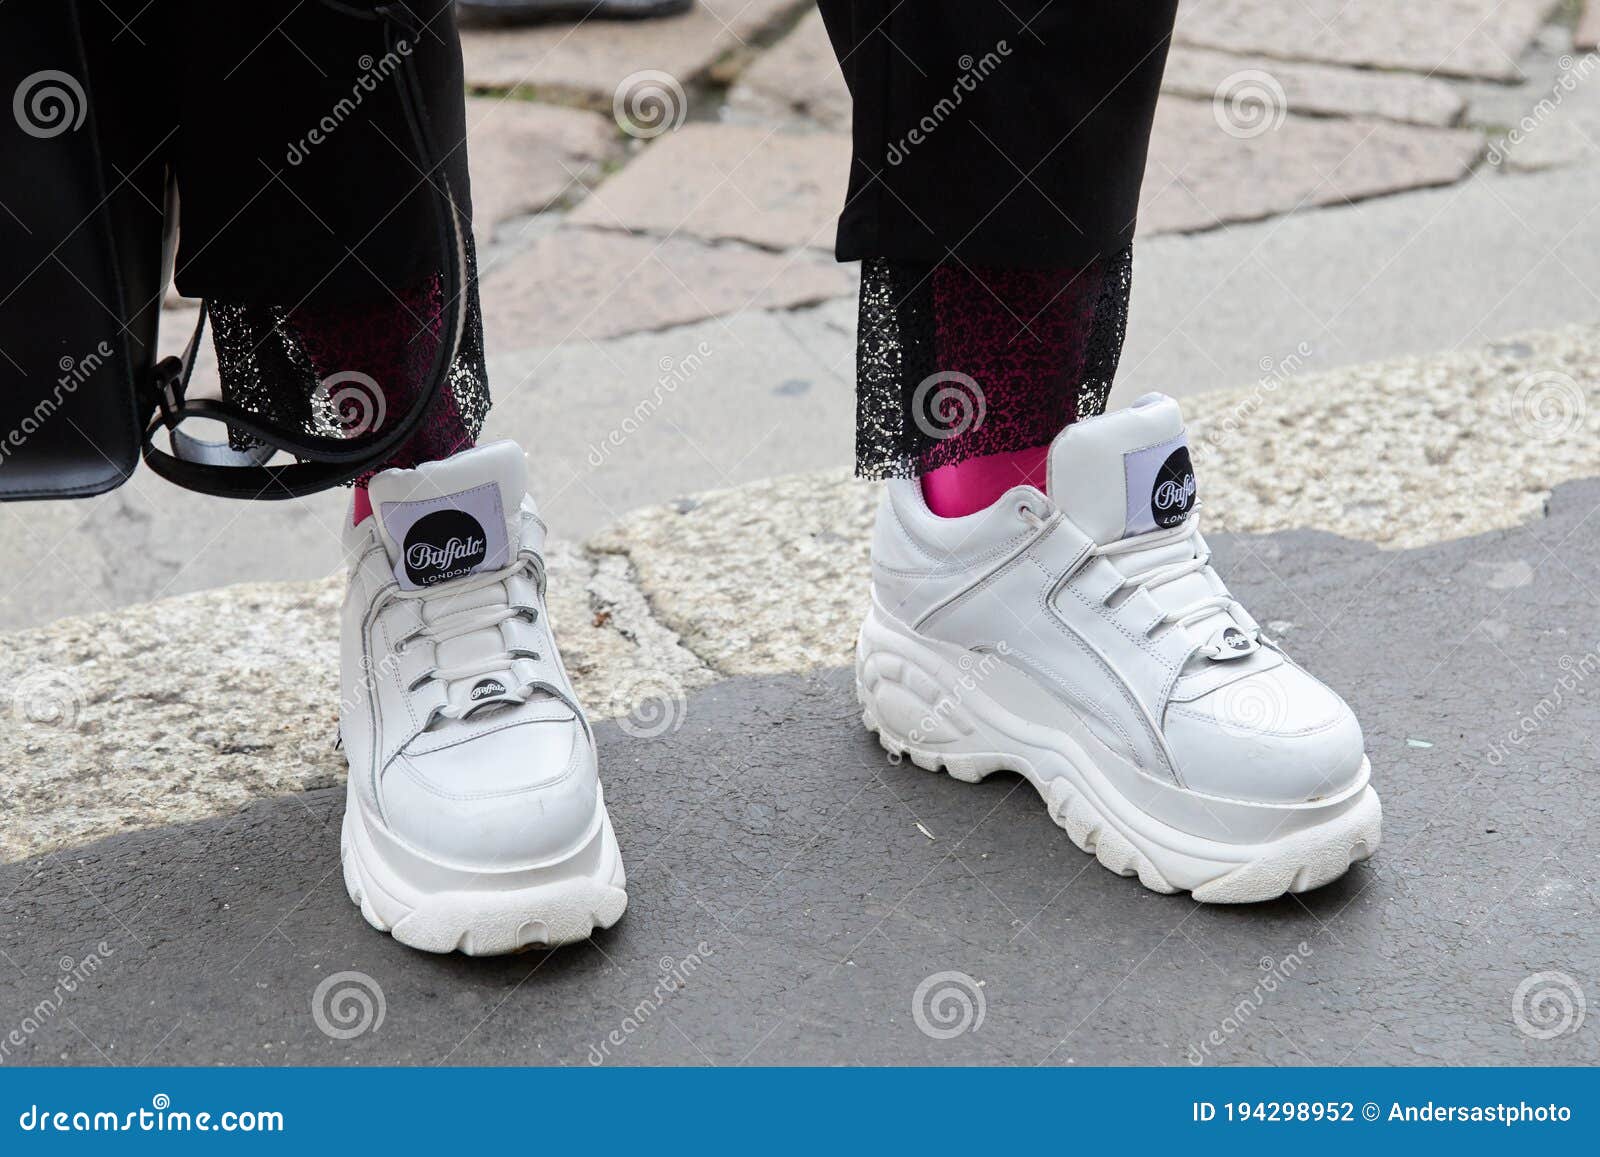 pensum guide nikotin Man with White Buffalo Shoes and Pink Socks before Frankie Morello Fashion  Show, Milan Fashion Editorial Photography - Image of outdoor, elegant:  194298952